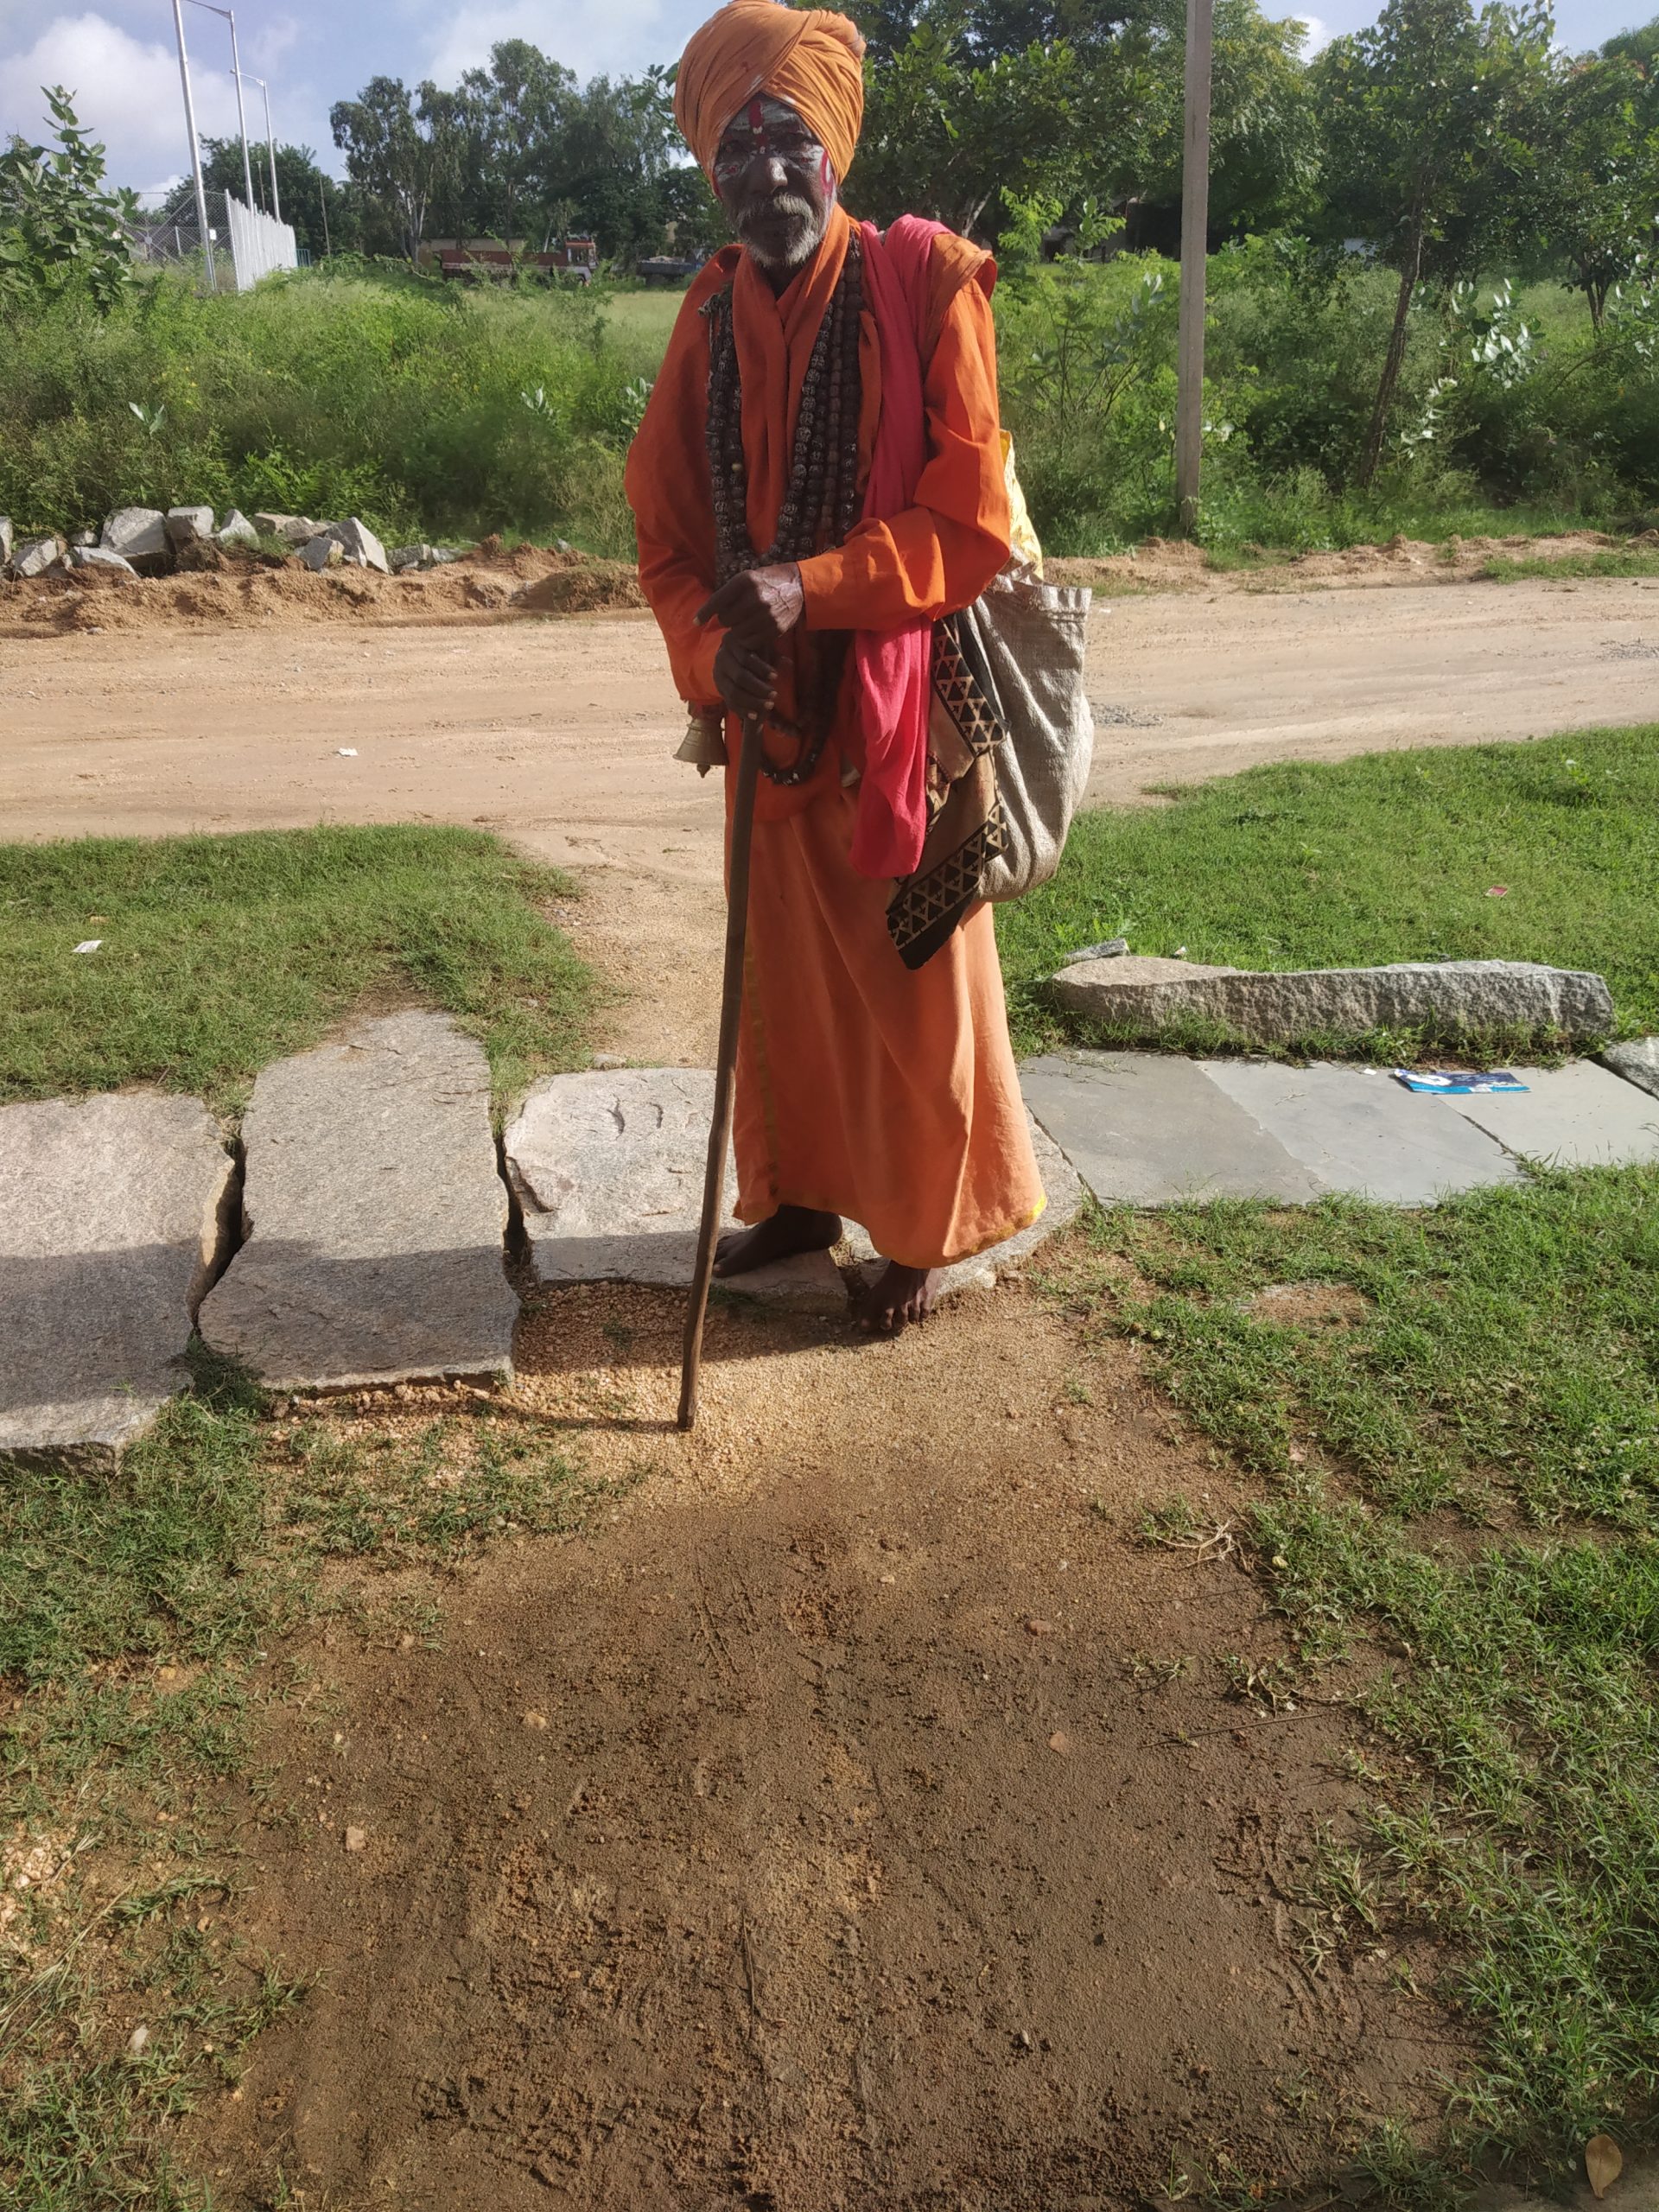 A monk in a town